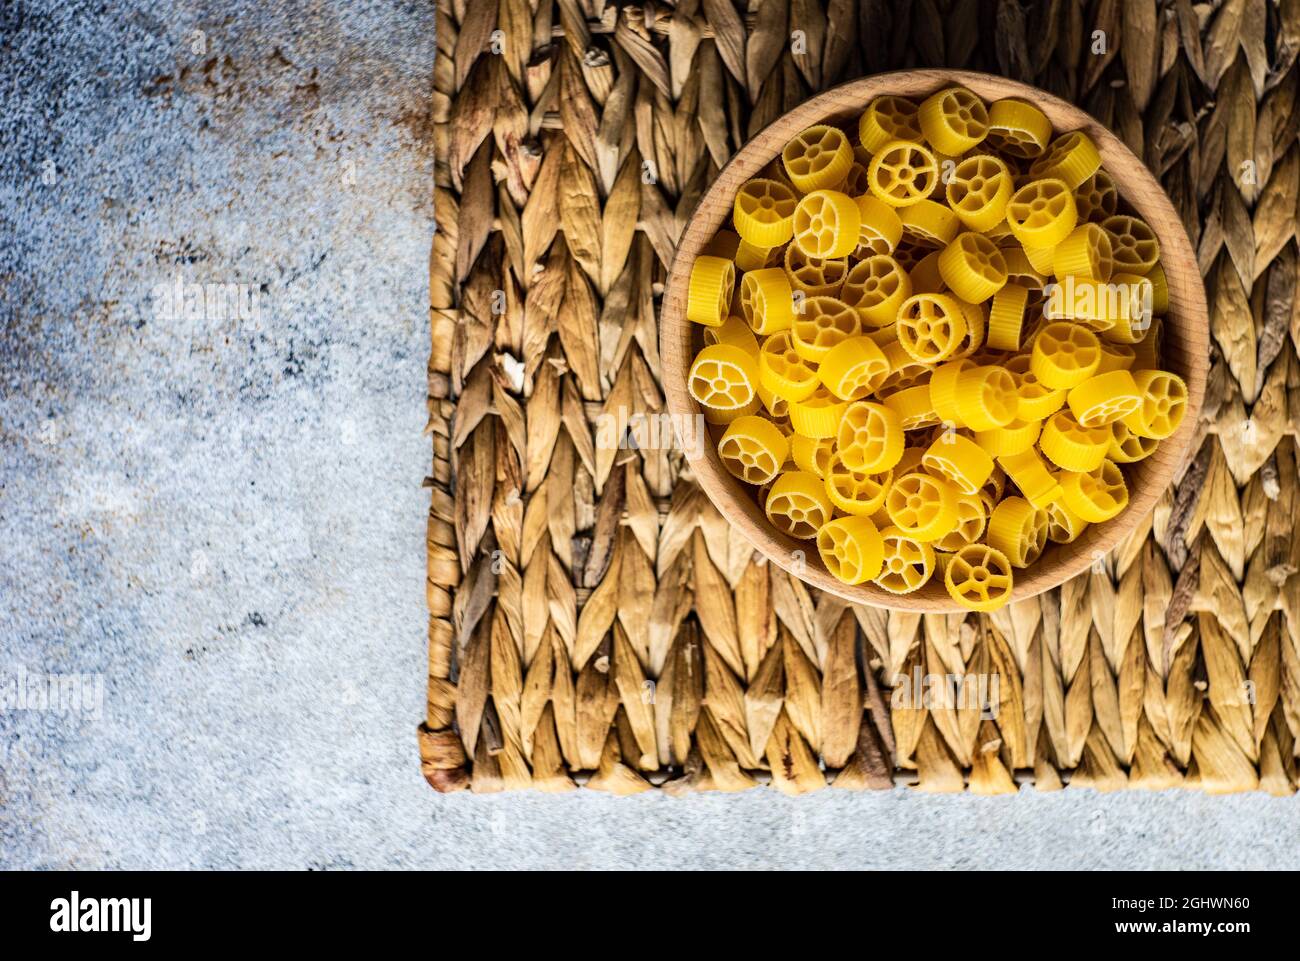 Overhead view of a bowl of ruote pasta on a place mat Stock Photo